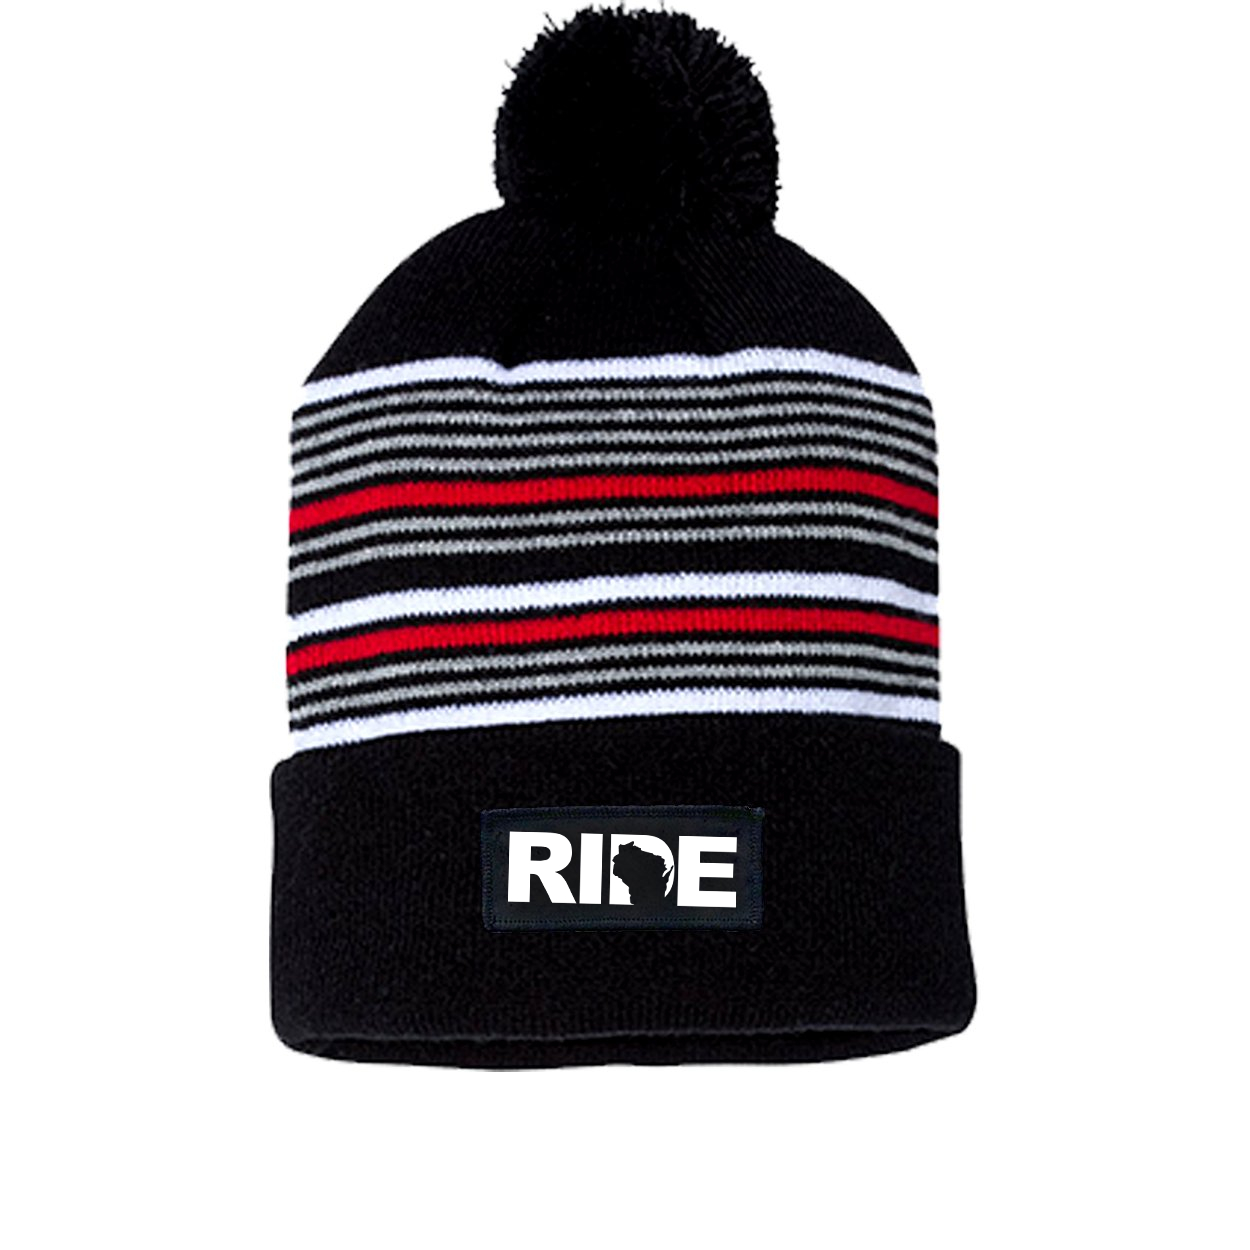 Ride Wisconsin Night Out Woven Patch Roll Up Pom Knit Beanie Black/ White/ Grey/ Red Beanie (White Logo)